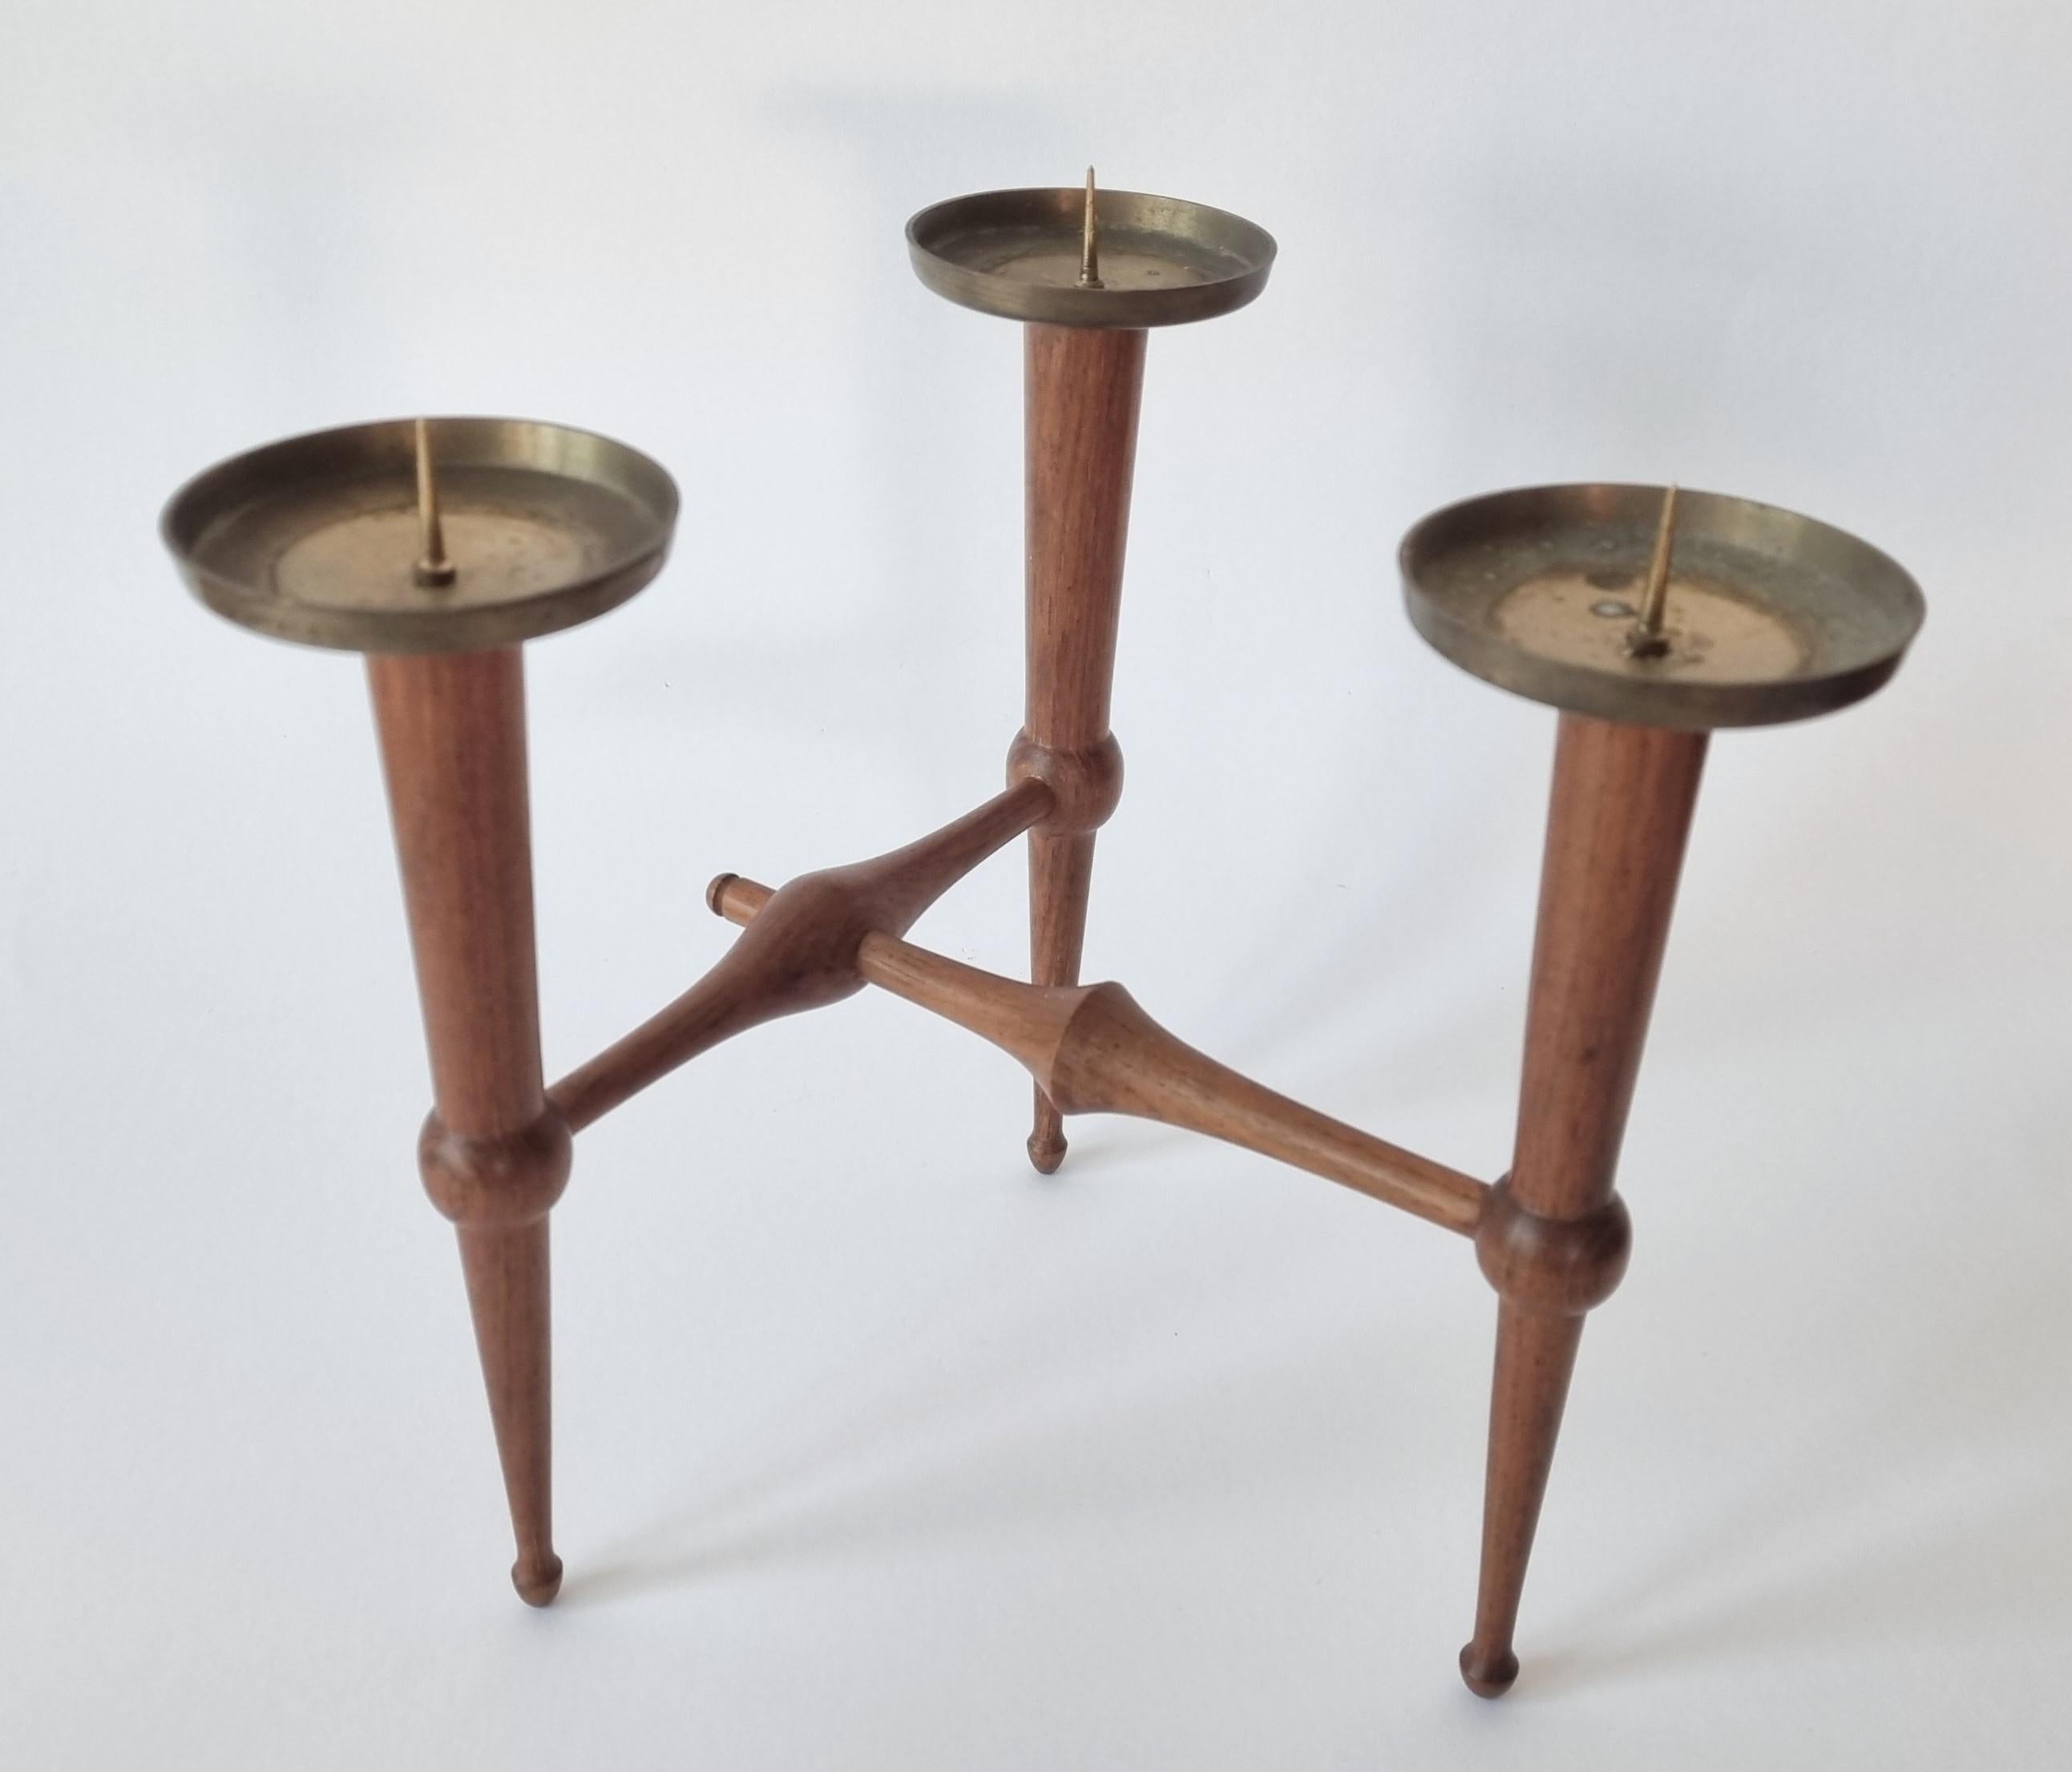 Midcentury Teak and Brass Rare Table Candle Holder / Stick, Denmark, 1960s For Sale 9